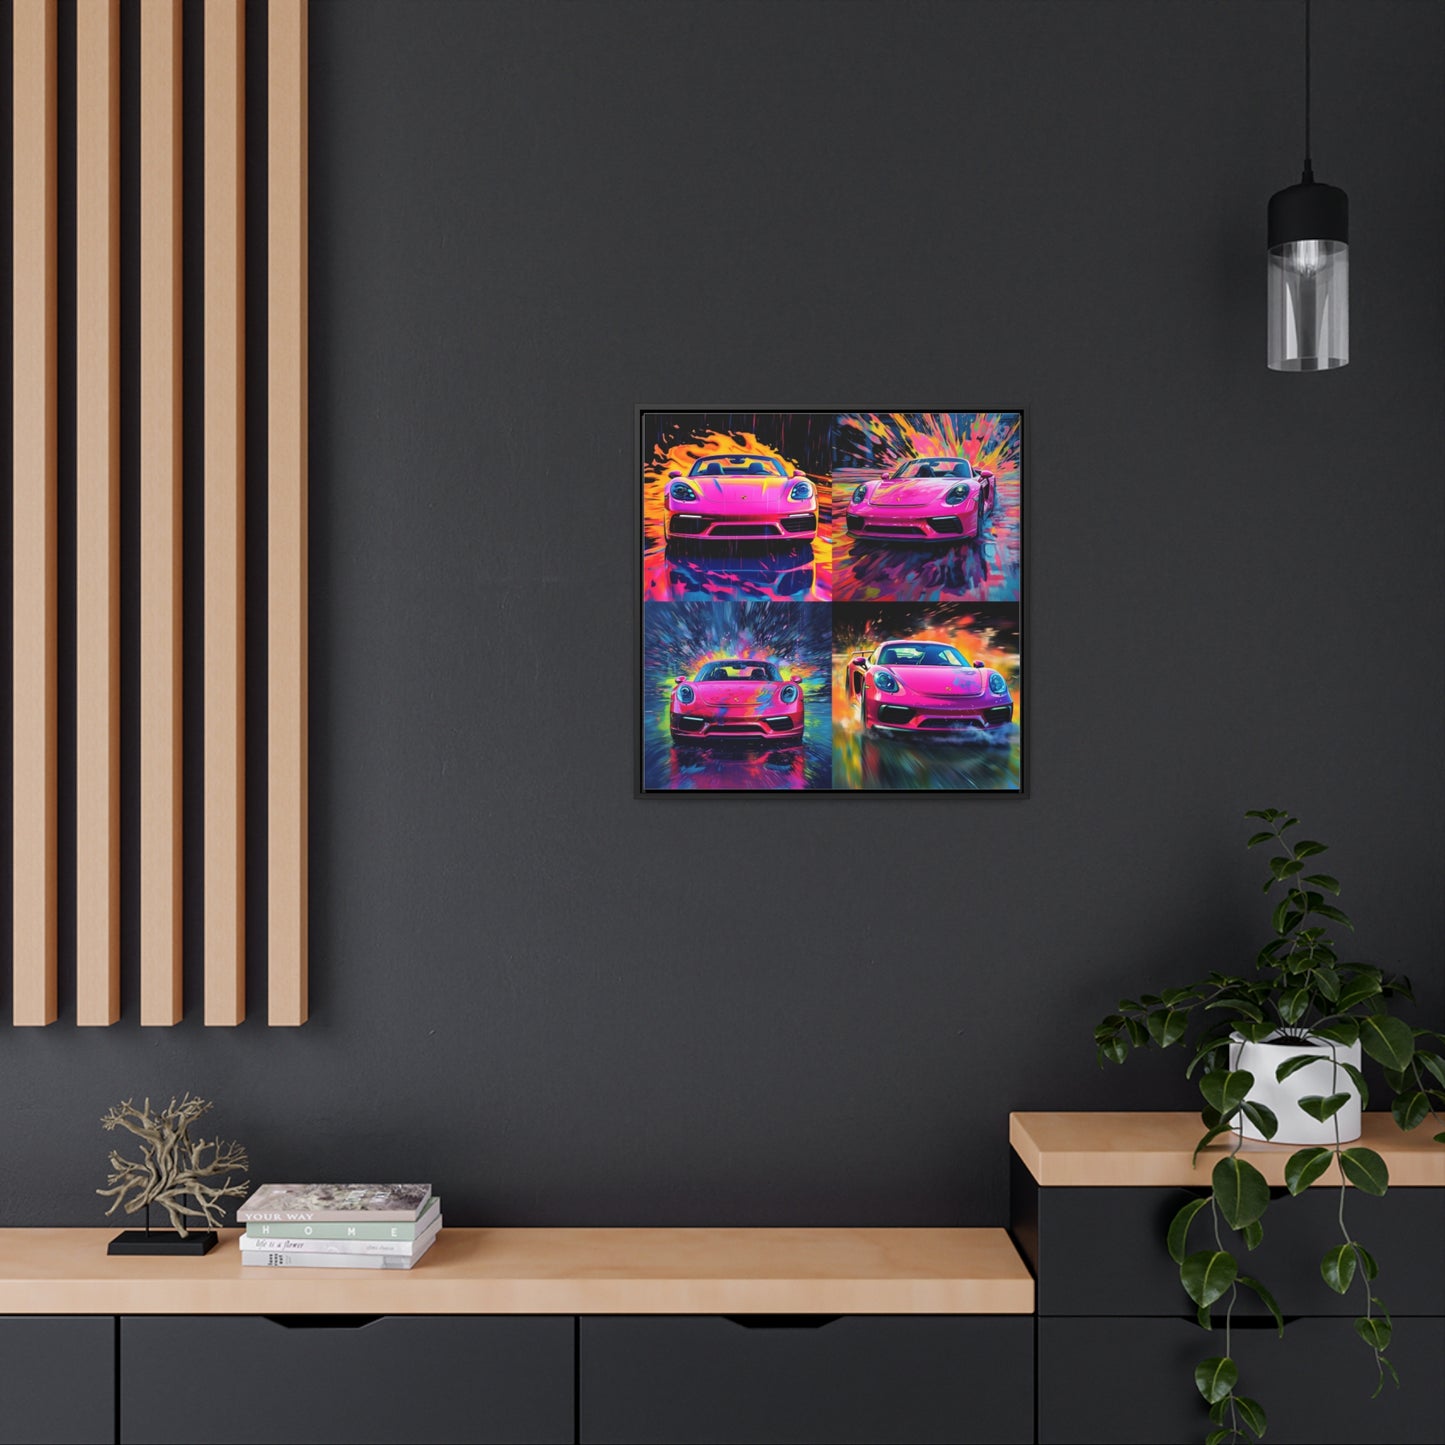 Gallery Canvas Wraps, Square Frame Pink Porsche water fusion 5